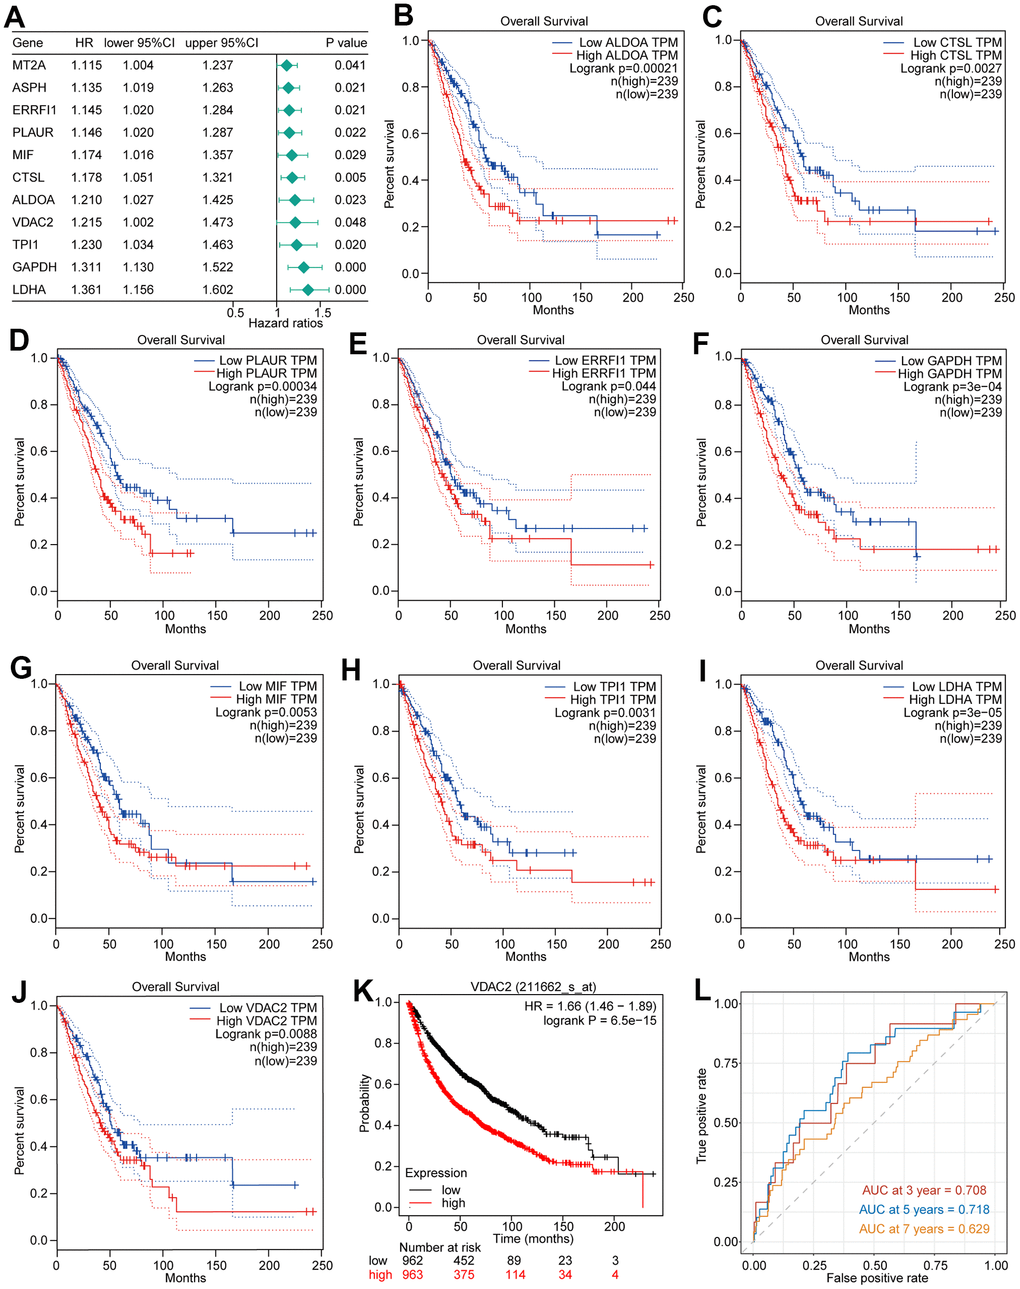 Hypoxia heterogeneous NSCLC subpopulation related genes’ prognostic value in NSCLC. (A) The 11 prognosis related genes with HR greater than 1. (B–J) The Kaplan Meier survival curves of 9 genes expression (high and low) in the TCGA-LUAD dataset. (K) The results of Kaplan Meier survival analysis of VDAC2 in the 2437 NSCLC patients. (L) Time dependent ROC curves of VDAC2 in NSCLC.